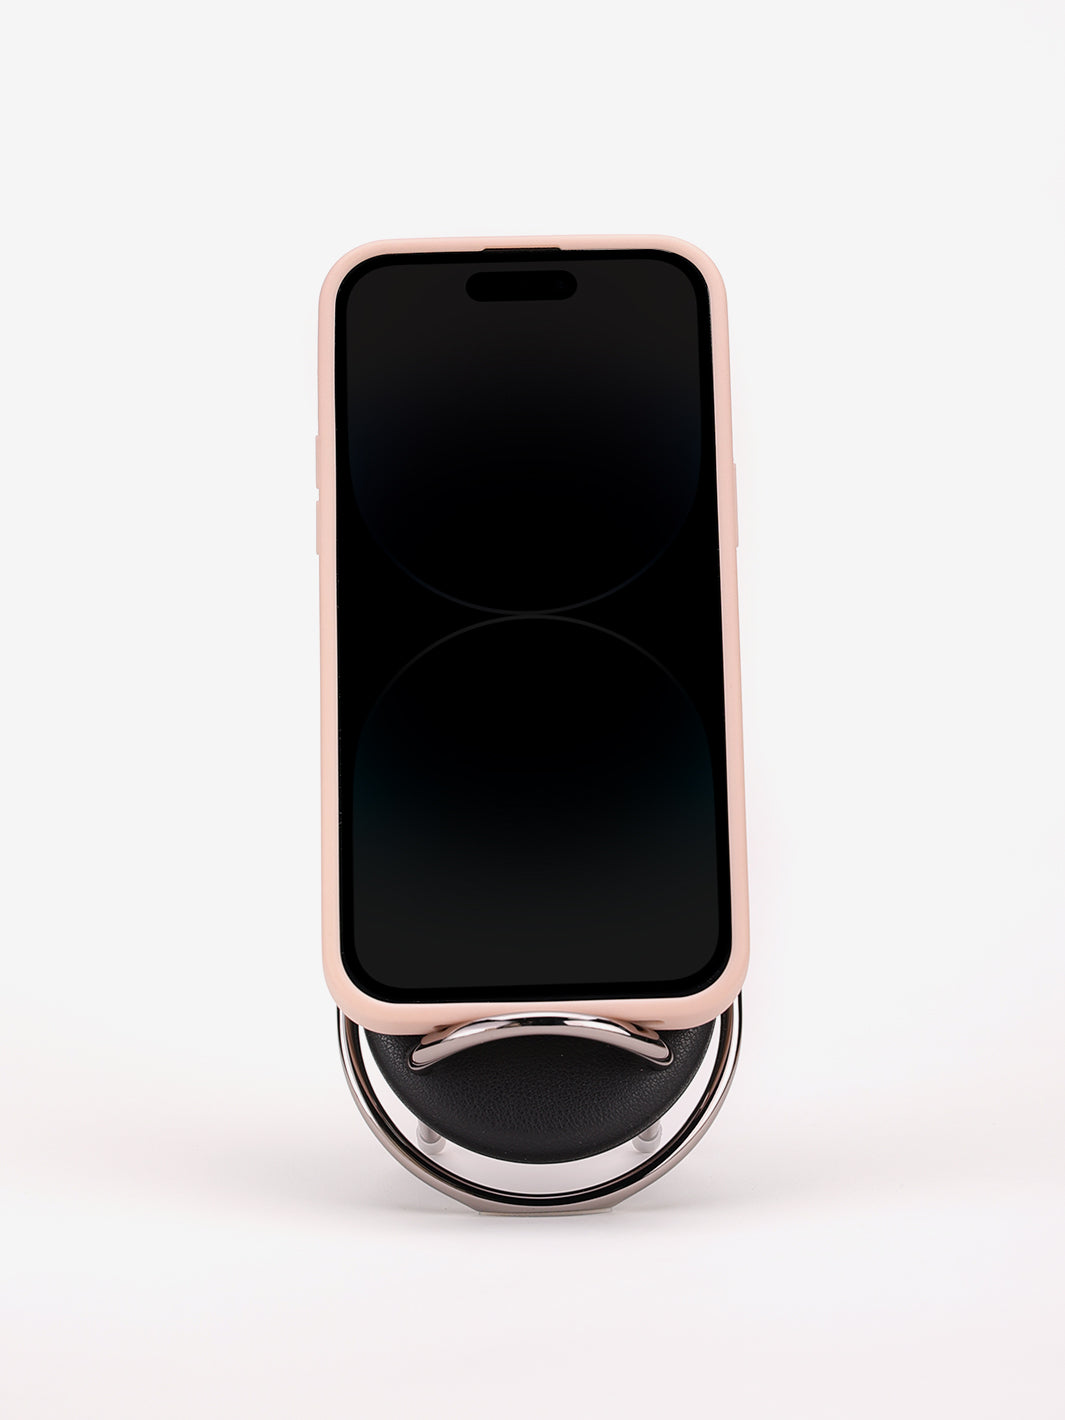 Custype Wireless charger stand black-4